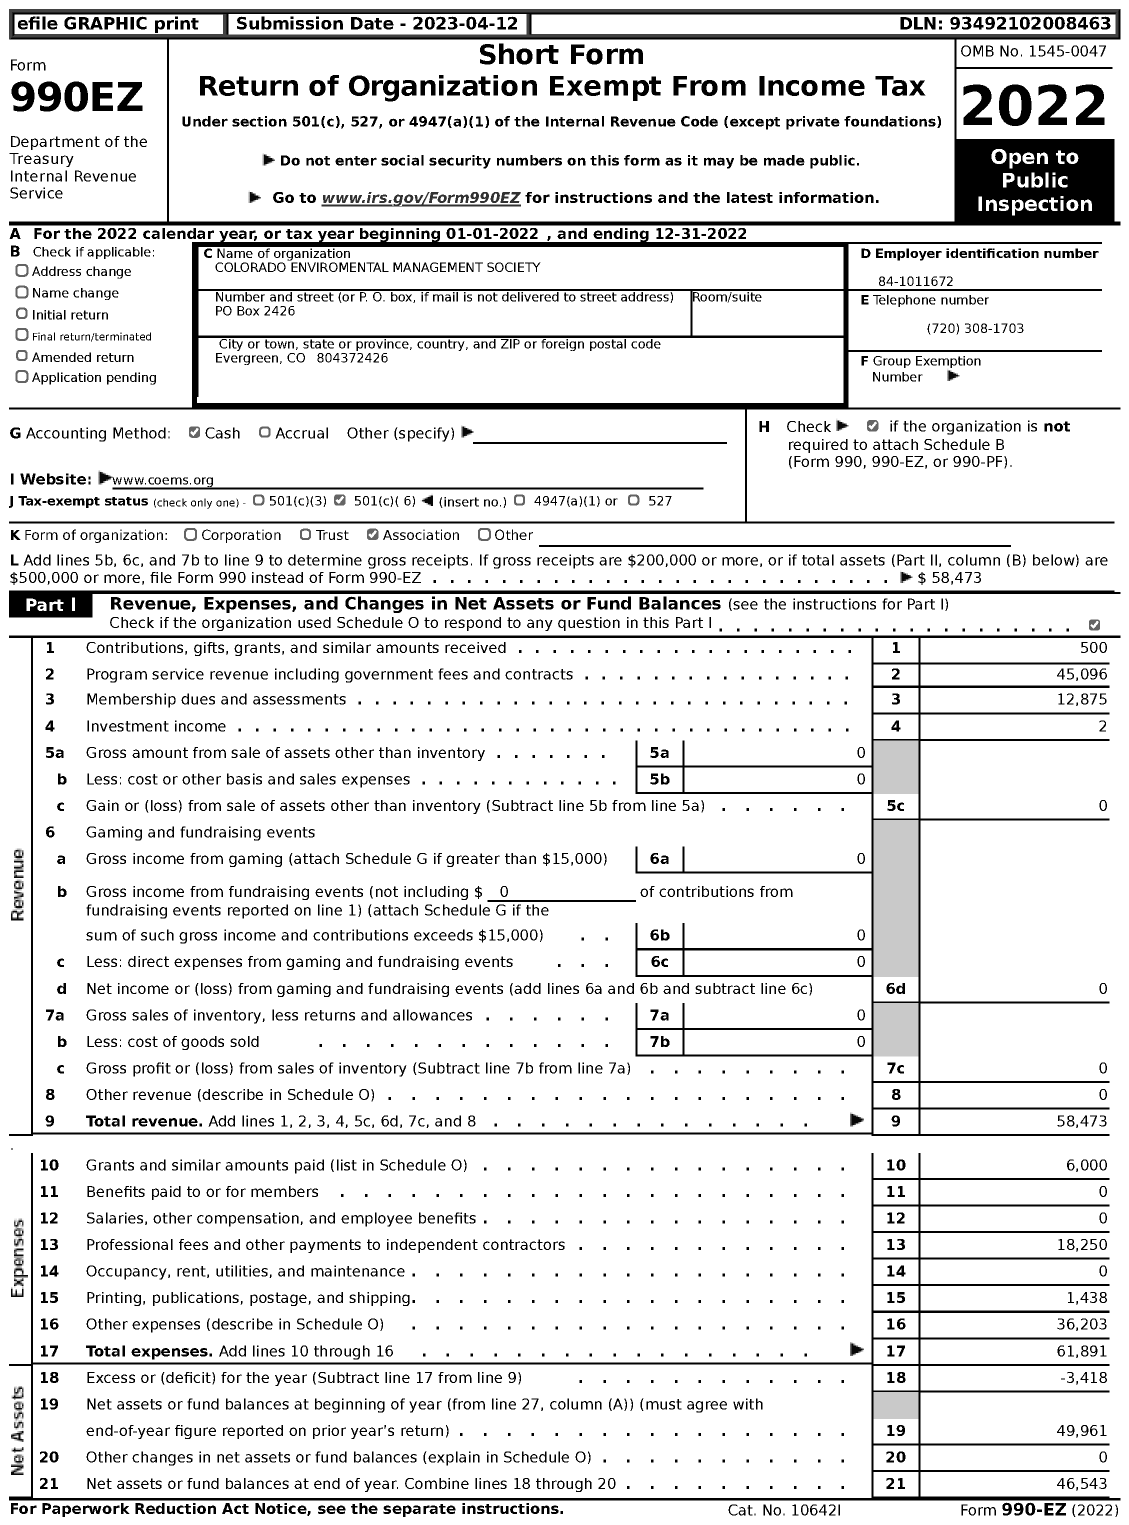 Image of first page of 2022 Form 990EZ for Colorado Enviromental Management Society